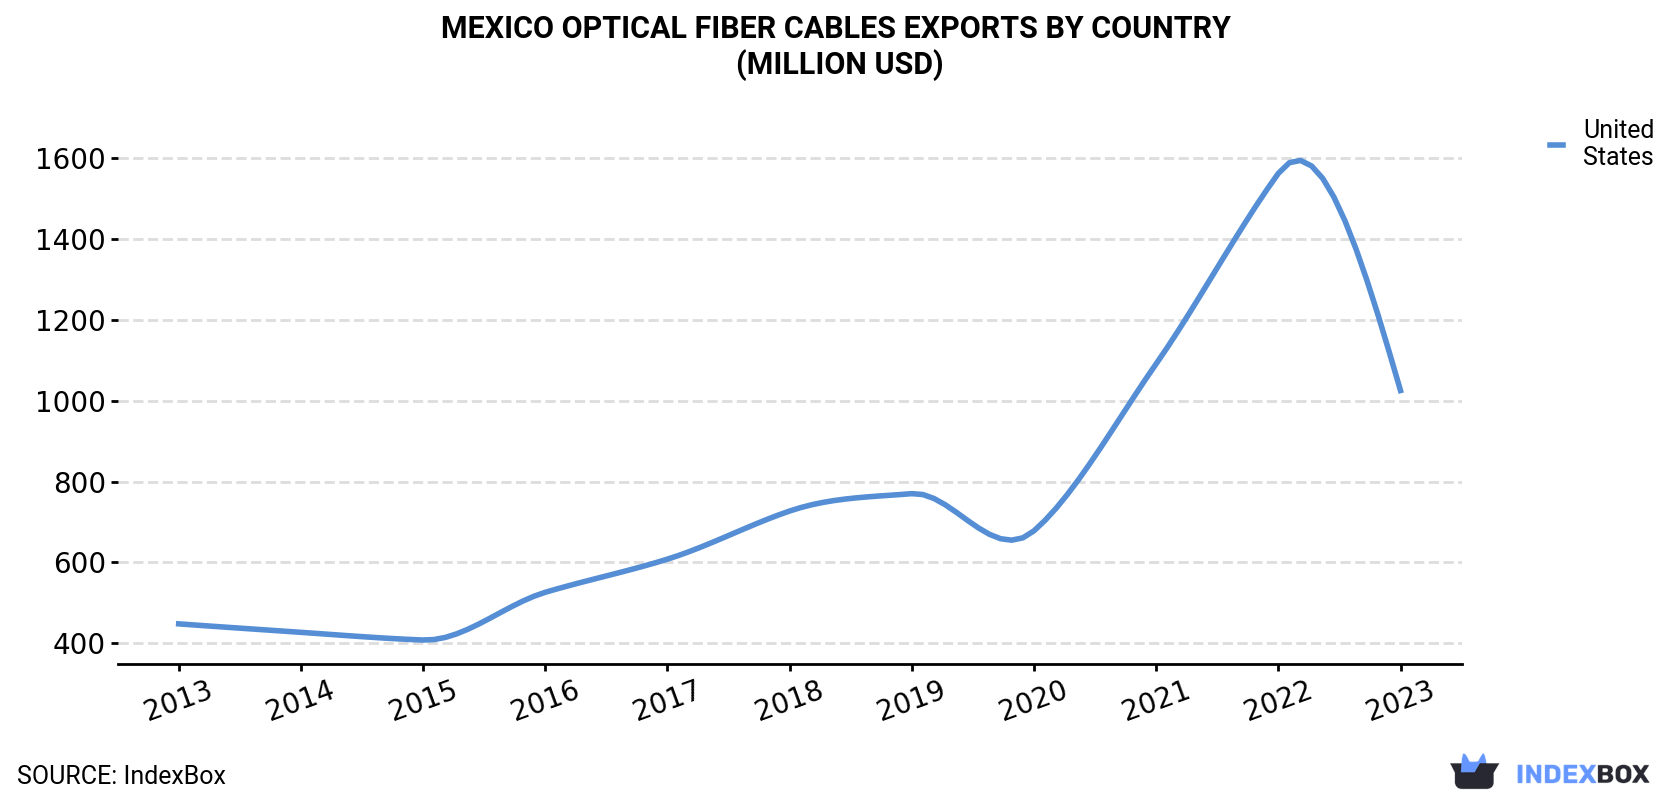 Mexico Optical Fiber Cables Exports By Country (Million USD)